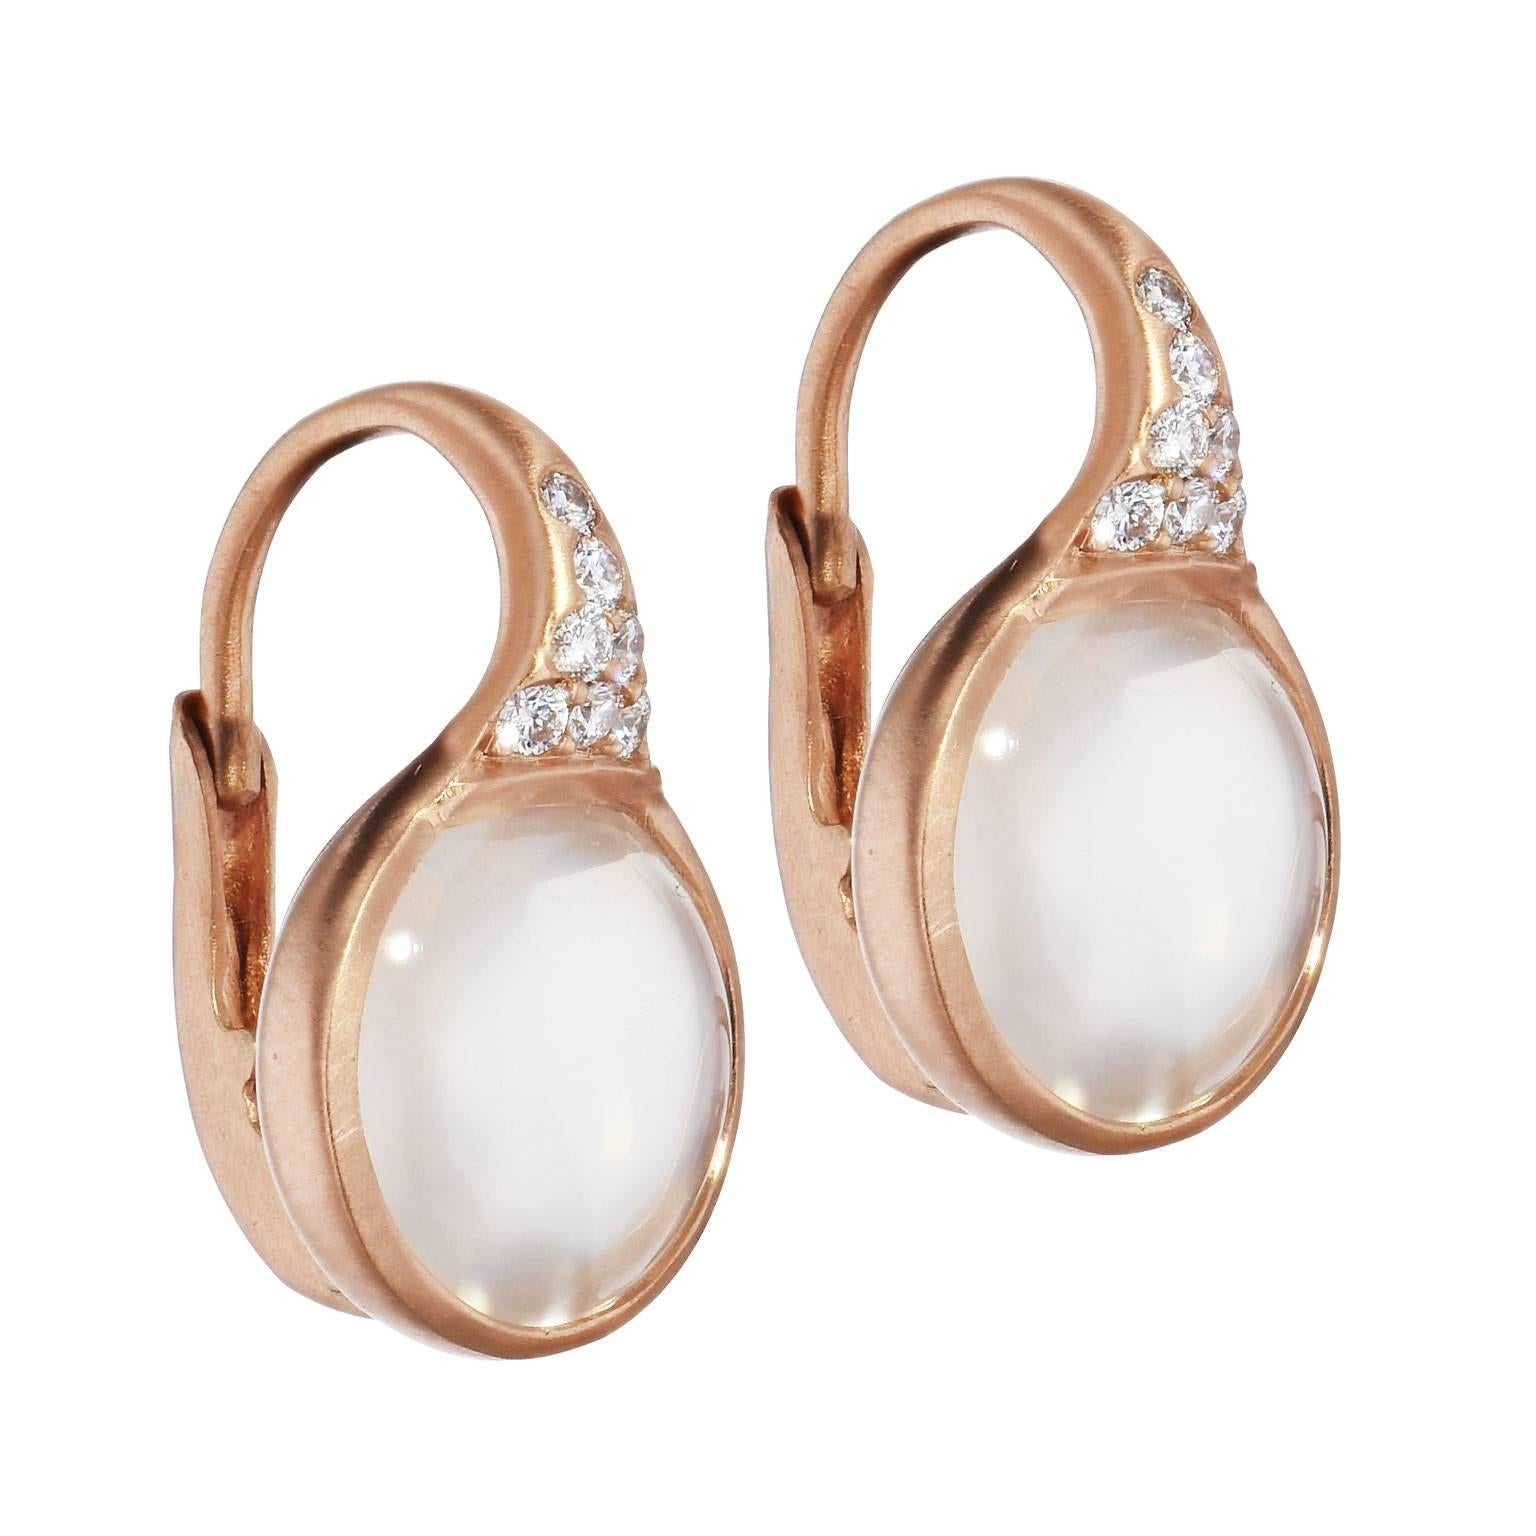 5.25 carat of cabochon white moonstone (10 millimeter) is set at center and embraced by 18 karat rose gold while 0.14 carat of pave-set diamonds (G/VS) adorn the baile in these lever-back earrings.